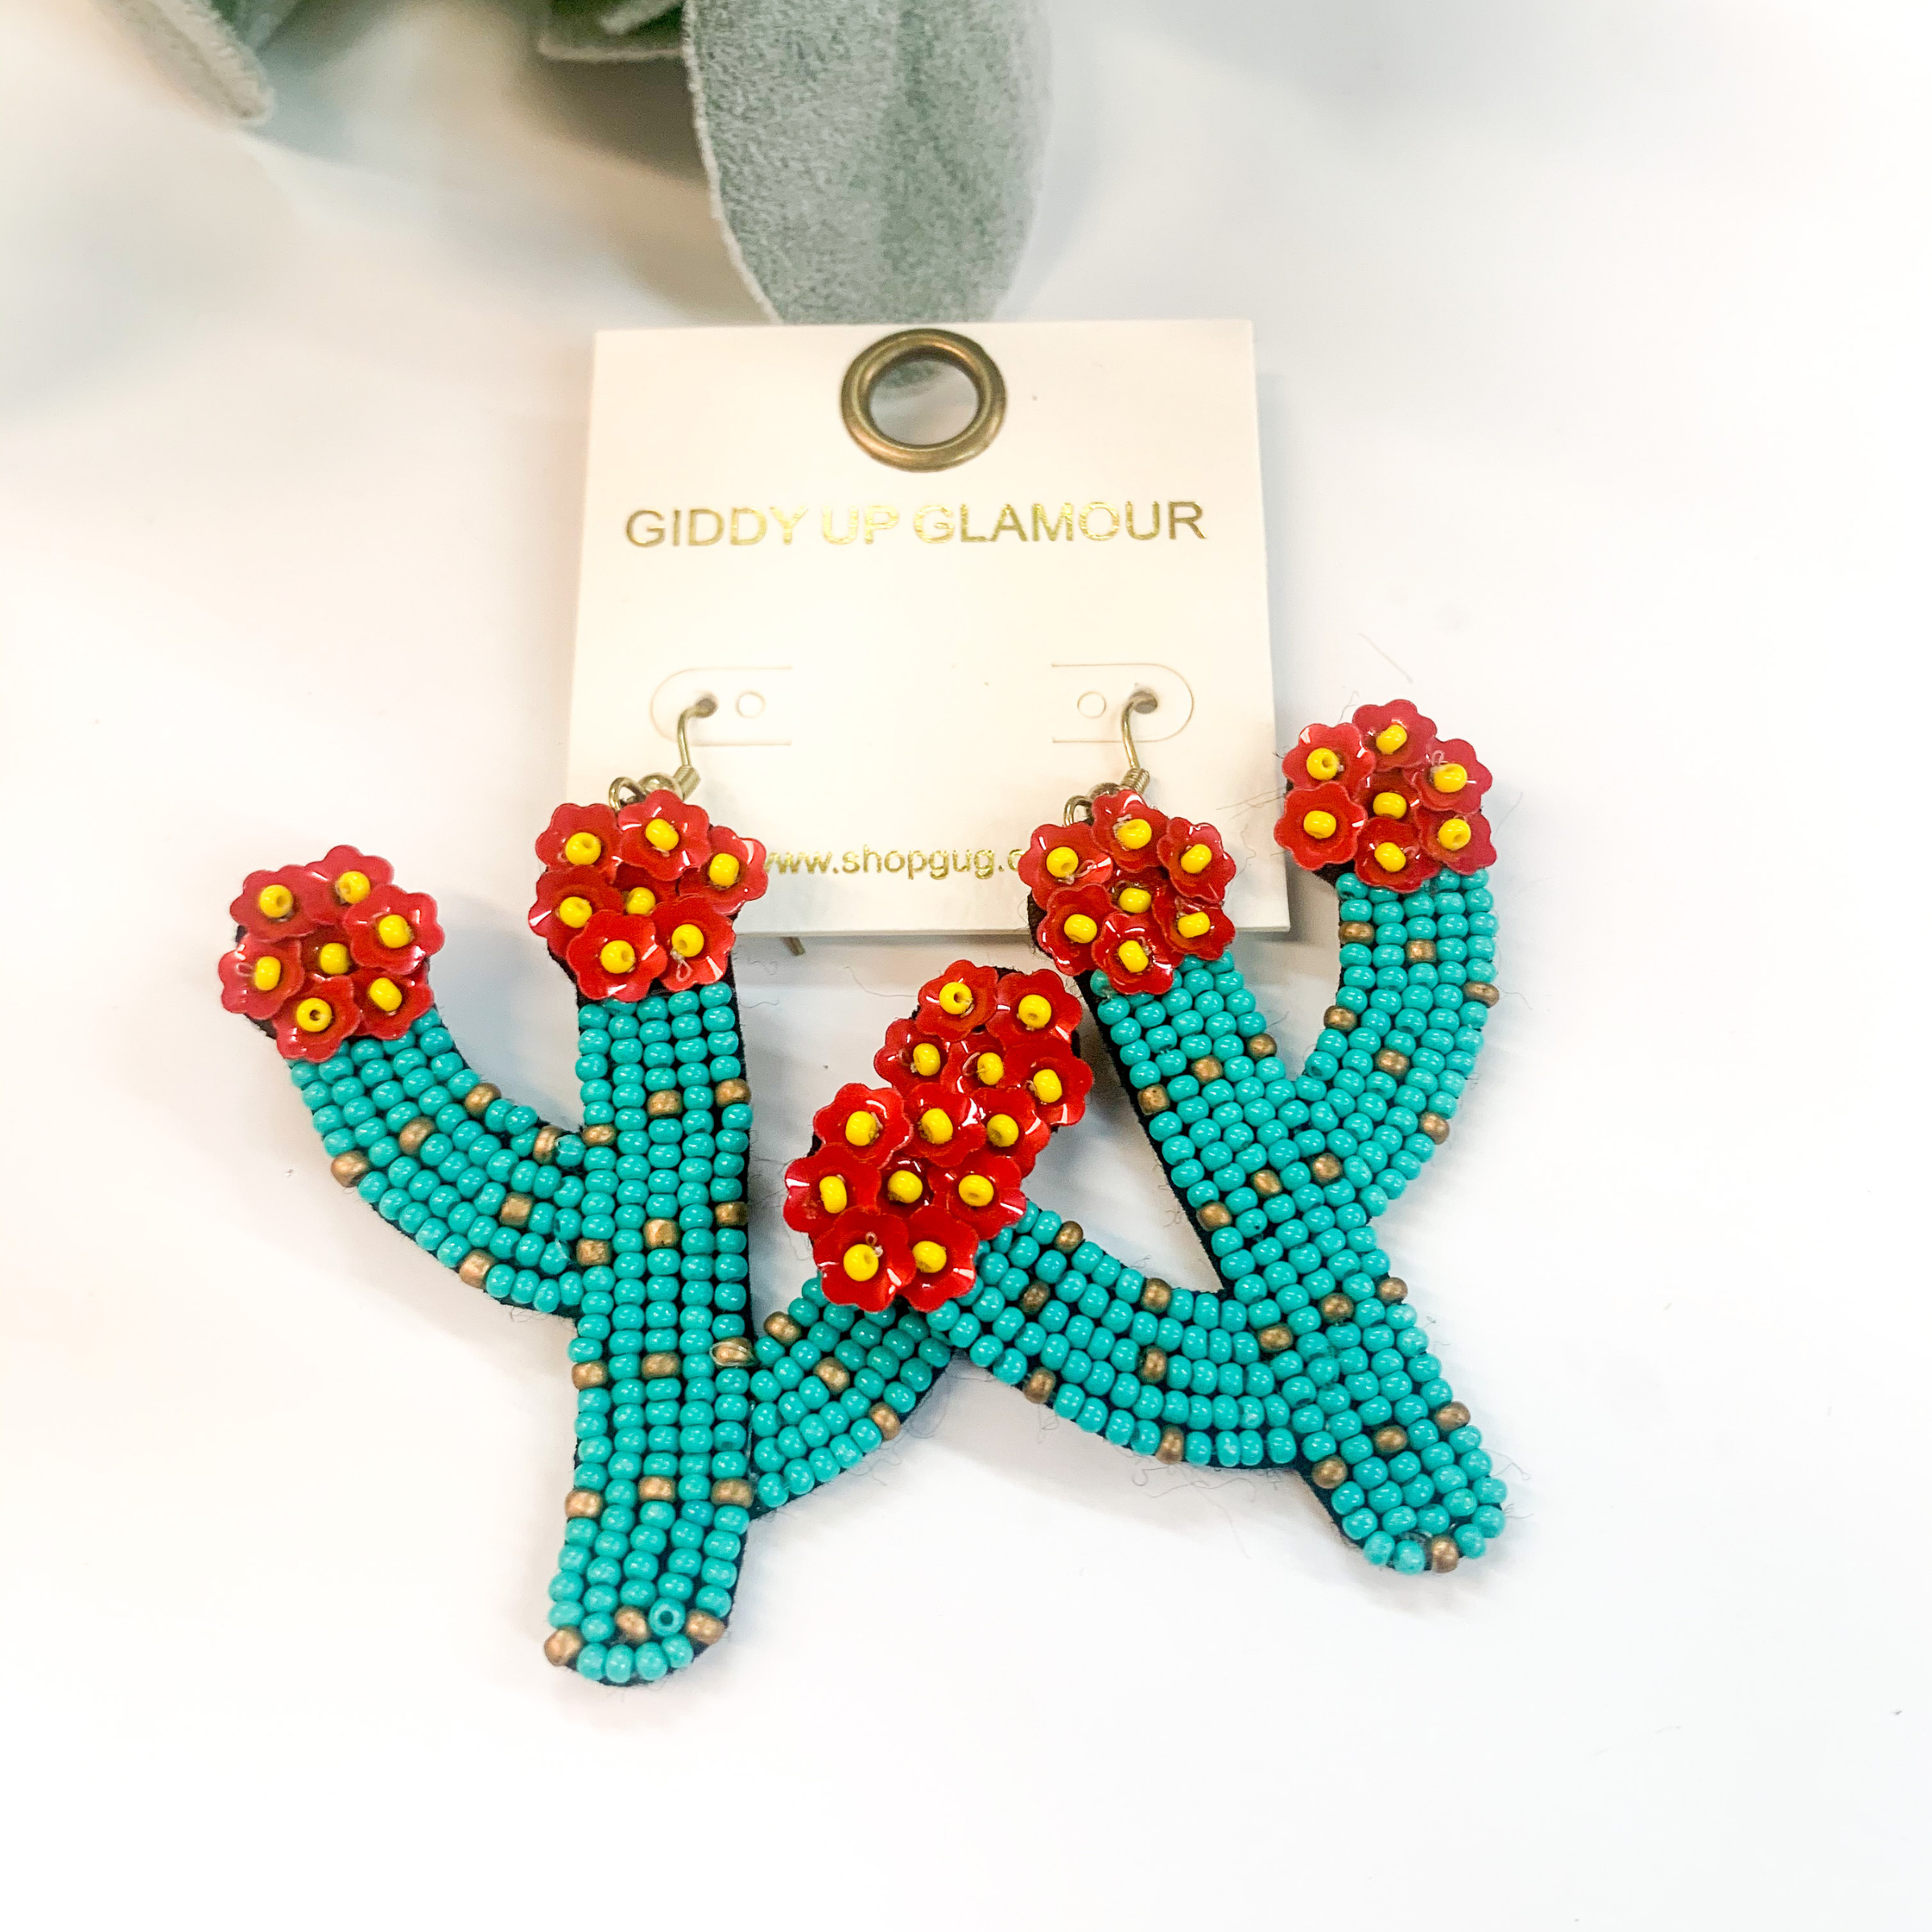 Seedbead Saguaro Cactus Earrings with Red Flowers in Turquoise - Giddy Up Glamour Boutique